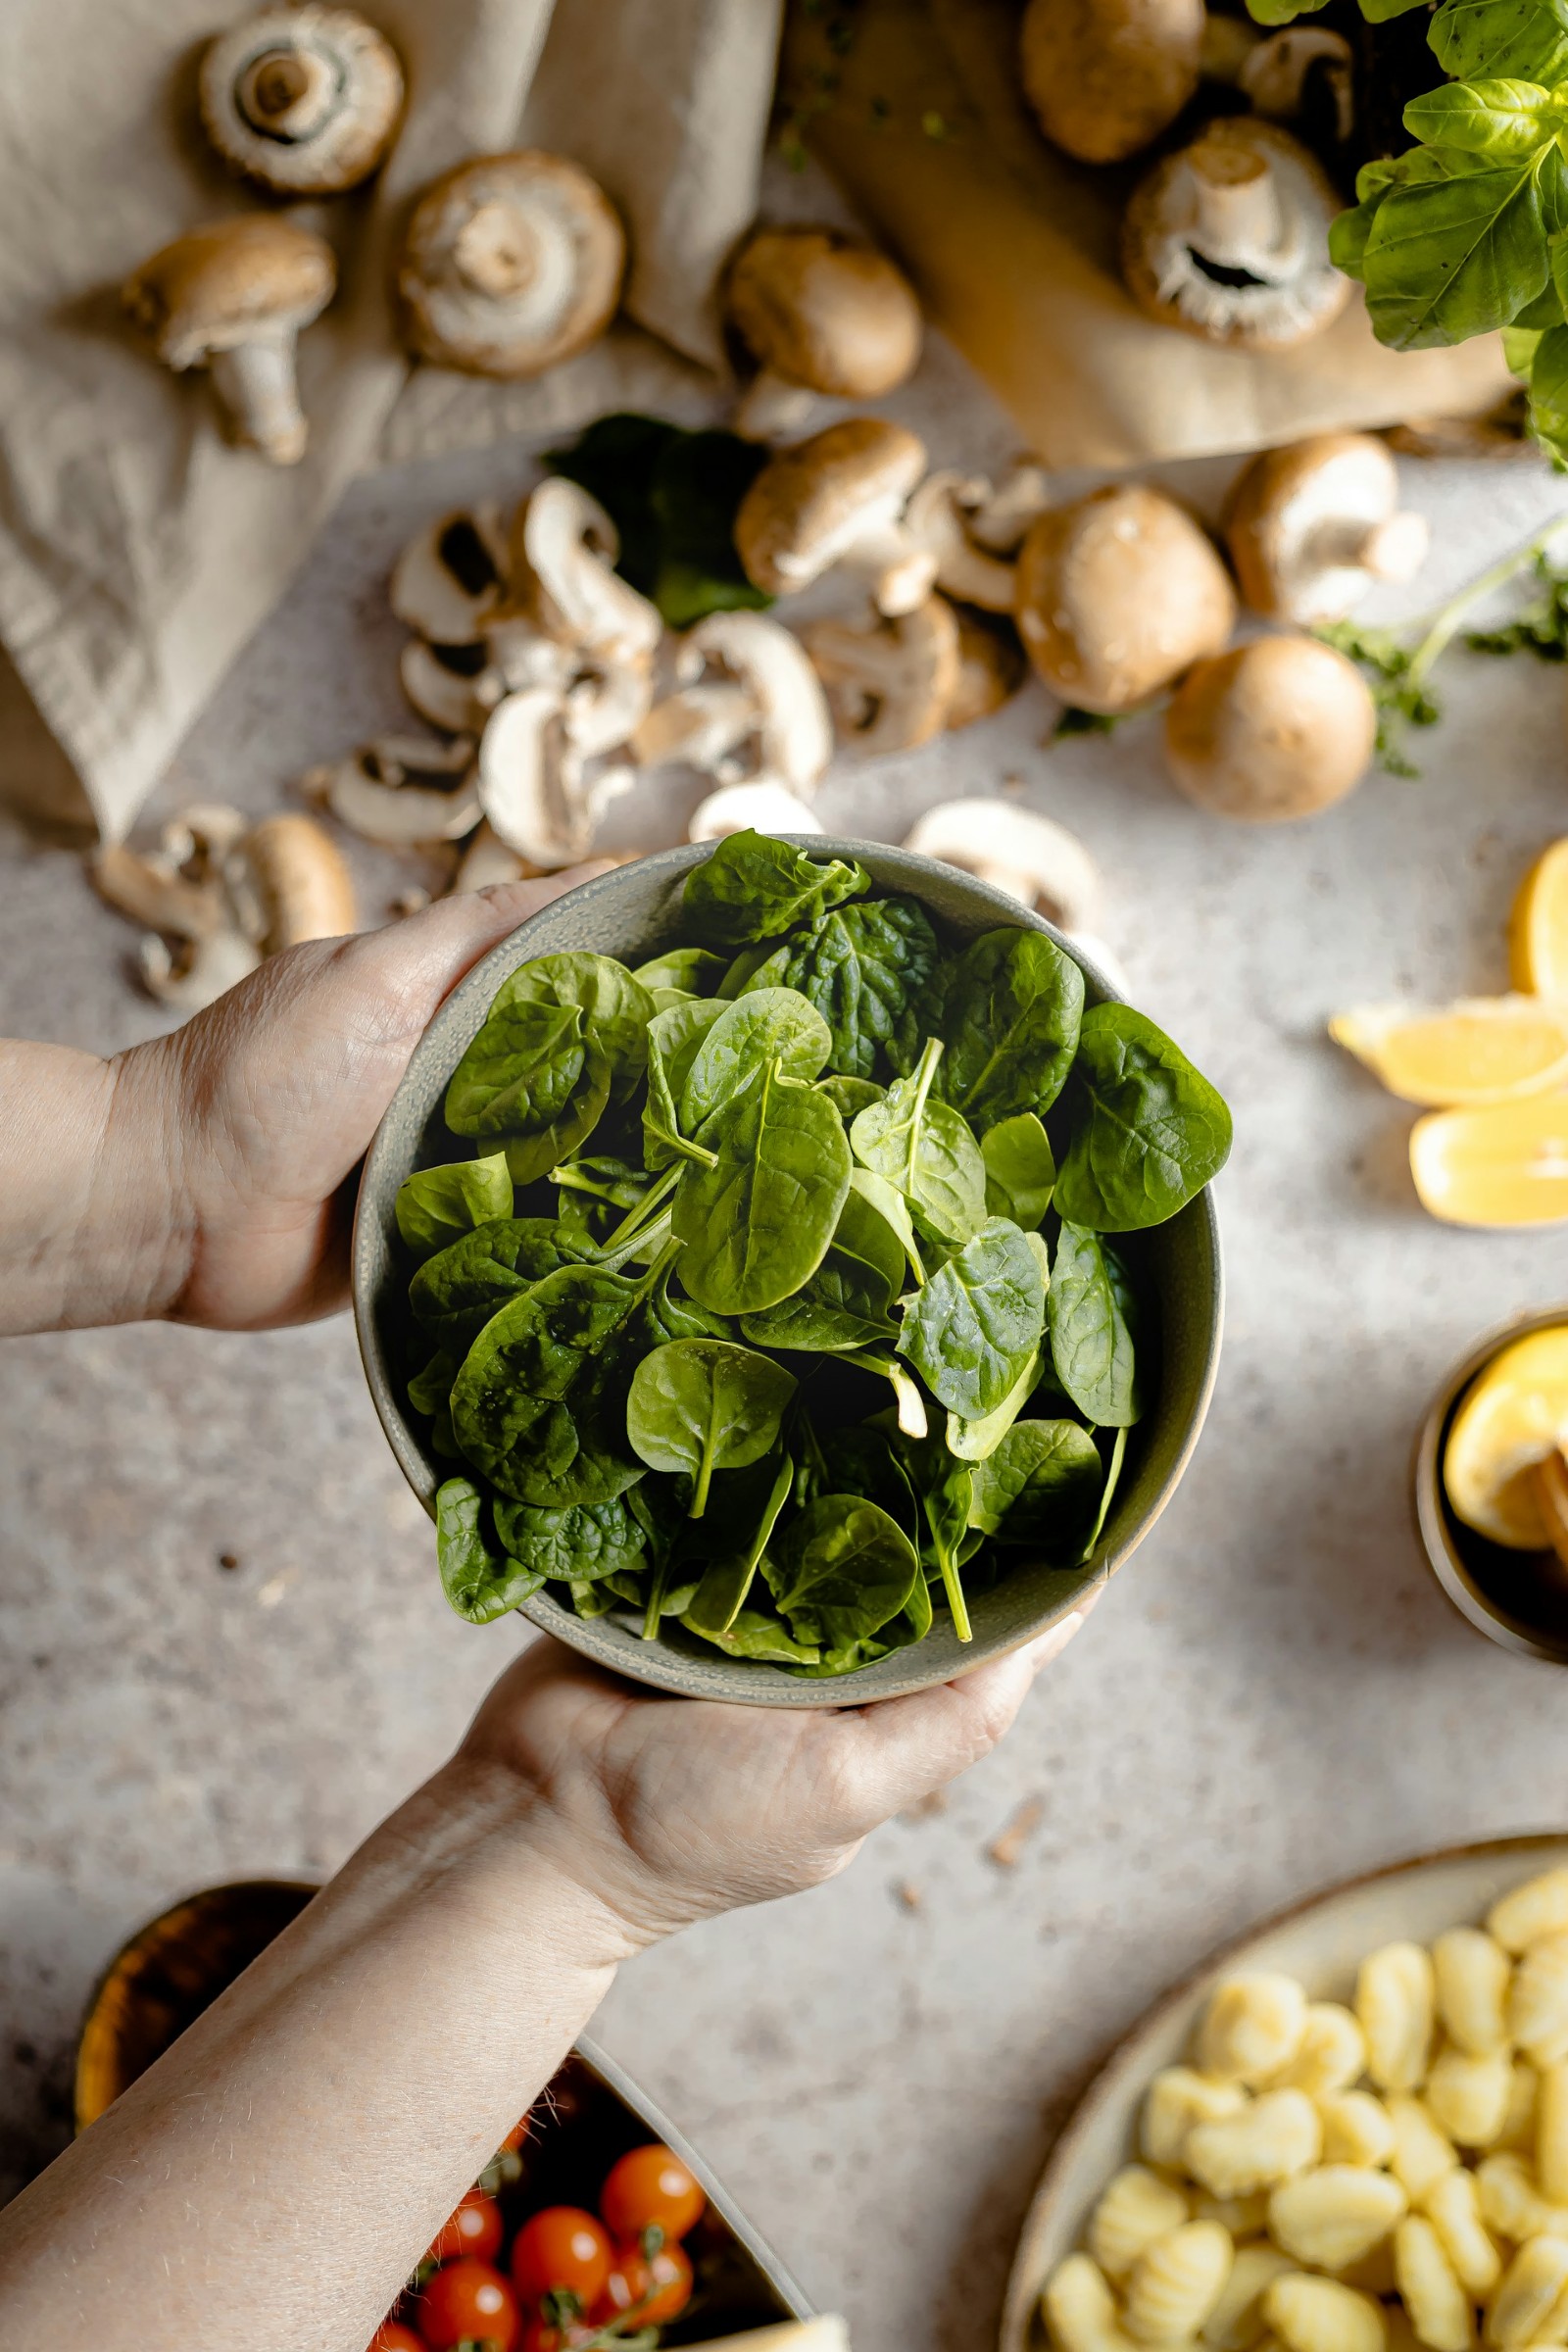 A bowl of spinach with hands holding it and mushrooms and other vegetables in the background.